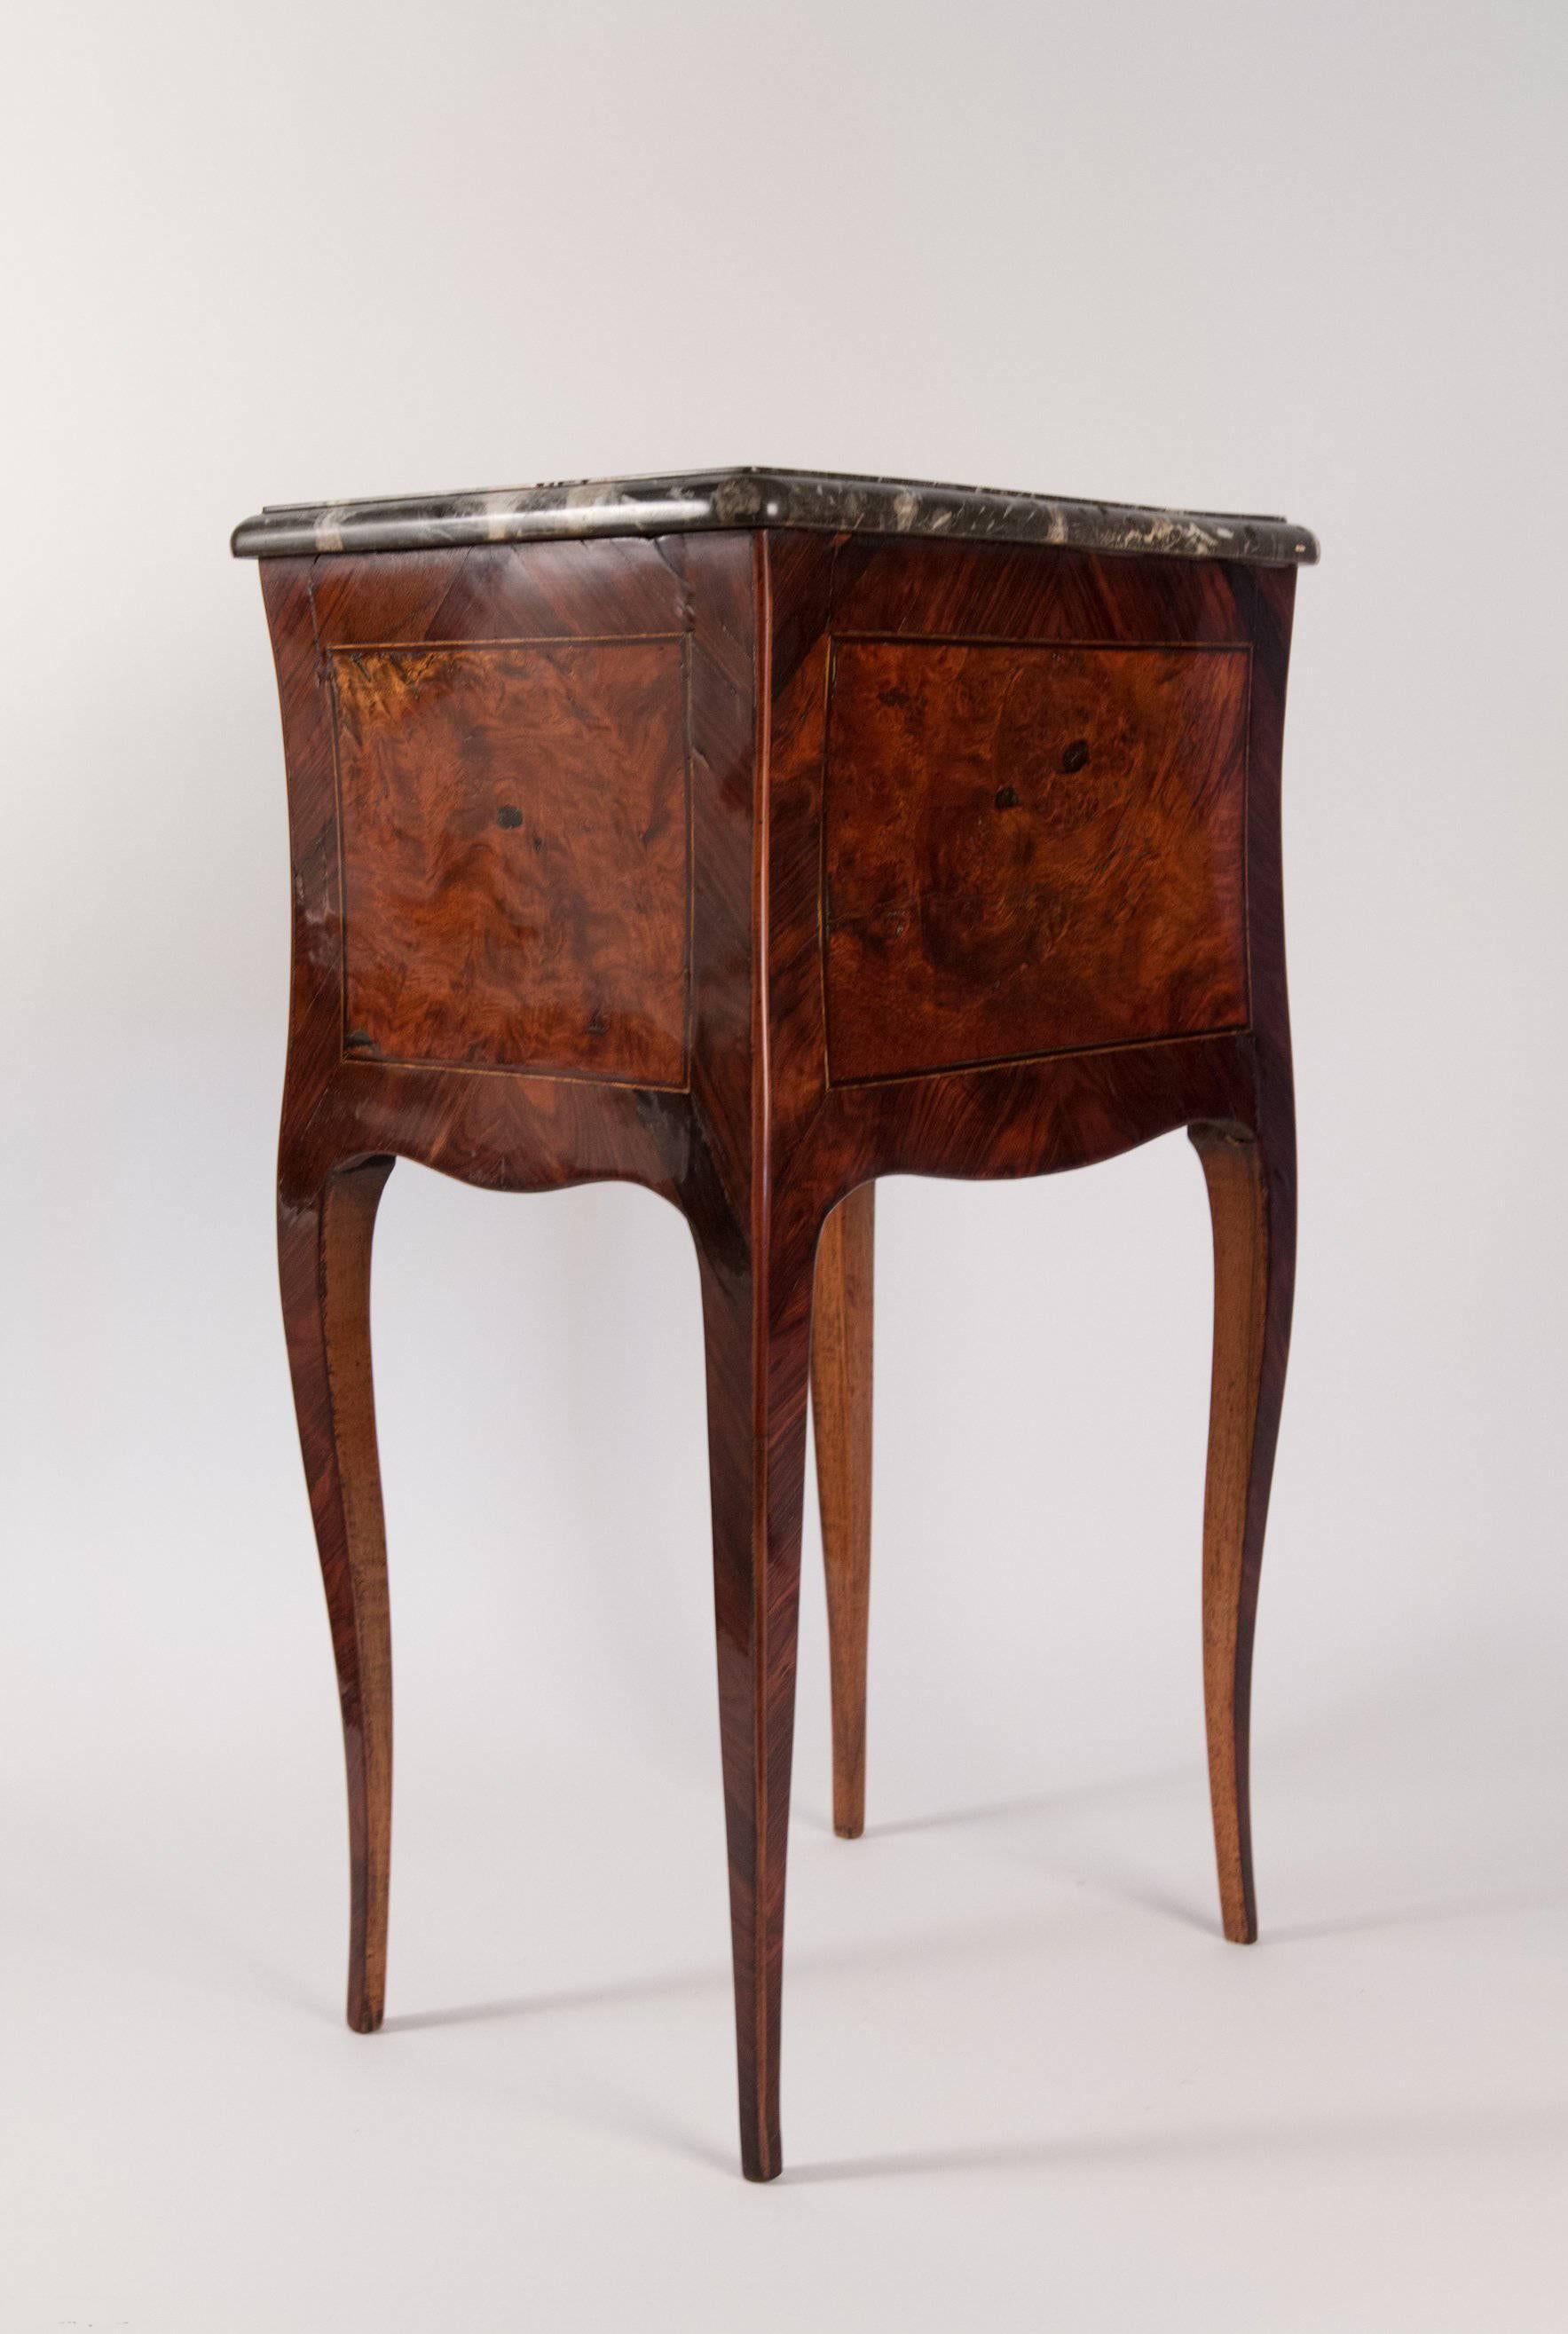 Veneer French Small Louis XV Style Serpentine Commode with Marble Top, circa 1820-1830 For Sale